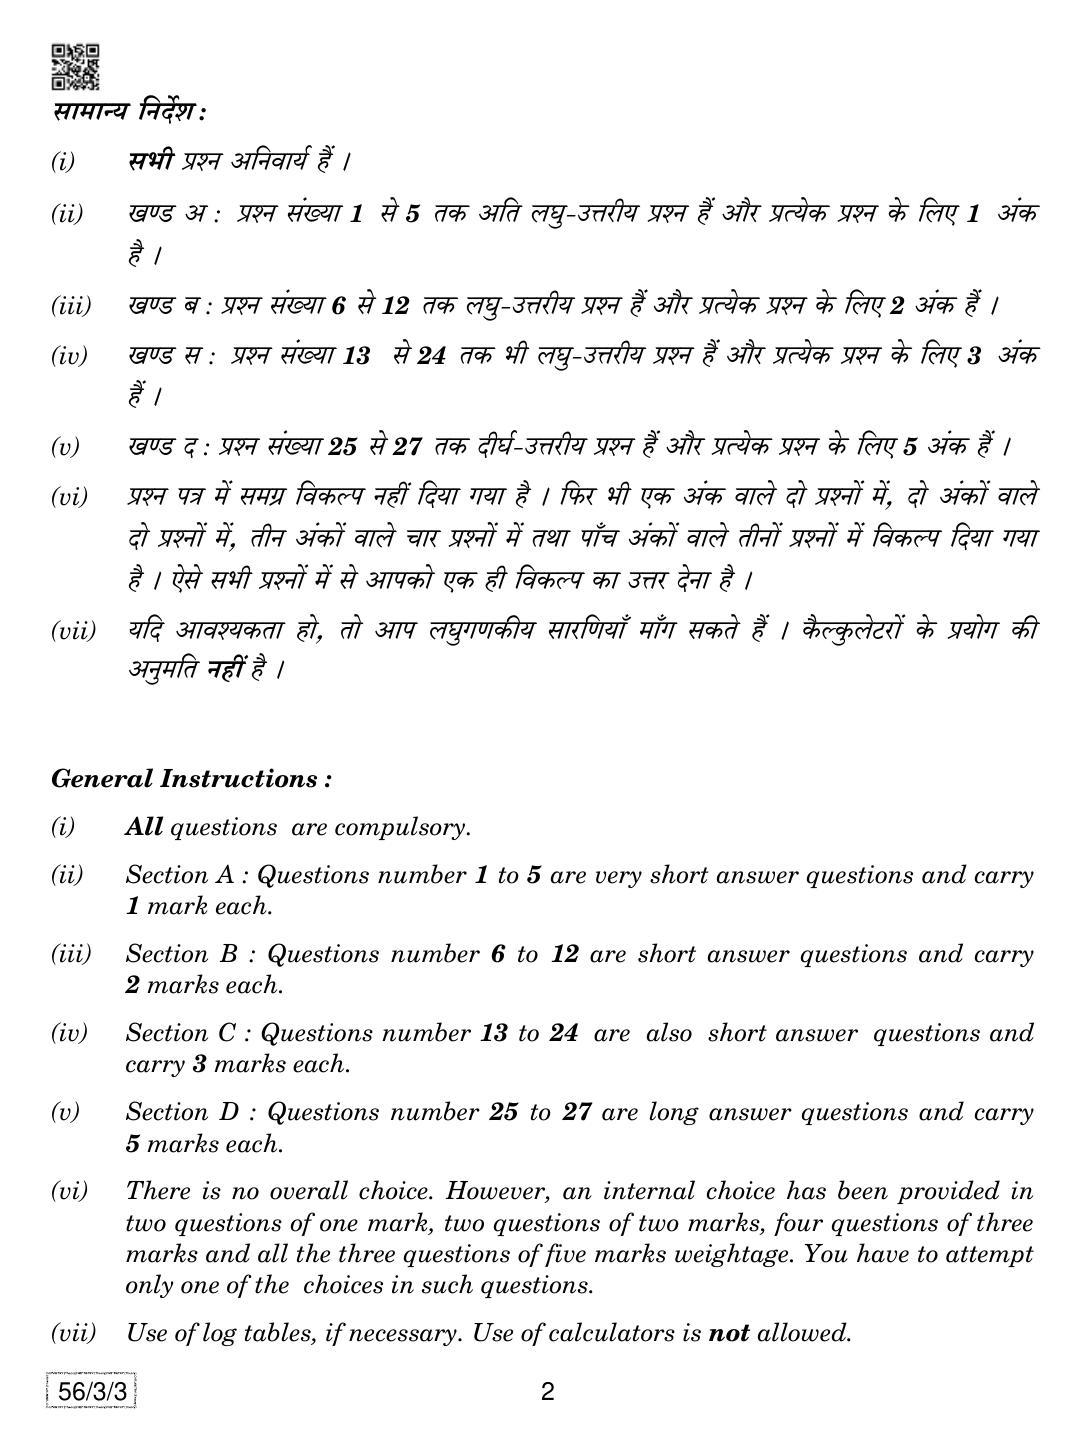 CBSE Class 12 56-3-3 Chemistry 2019 Question Paper - Page 2